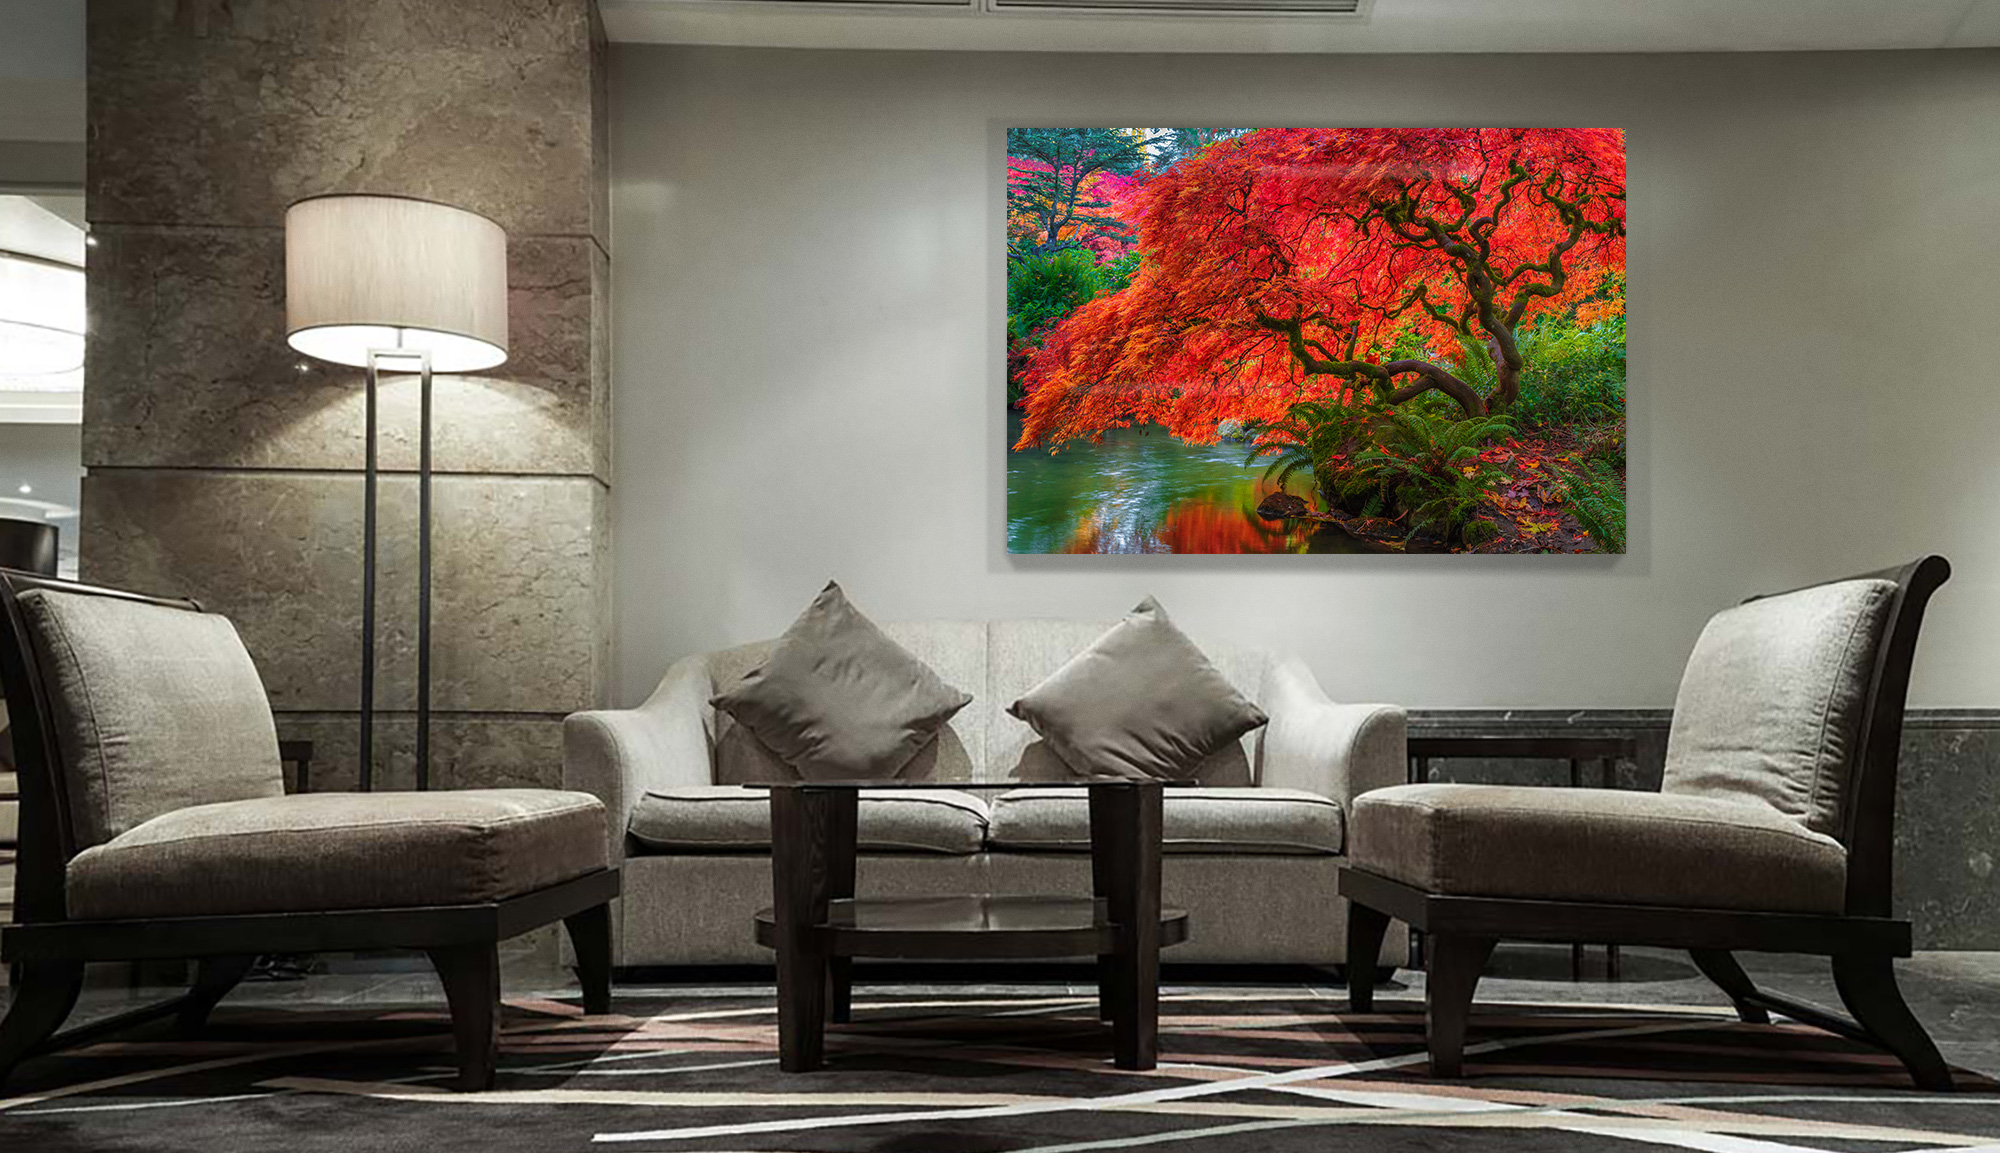 Tree Of Fire in a lobby space